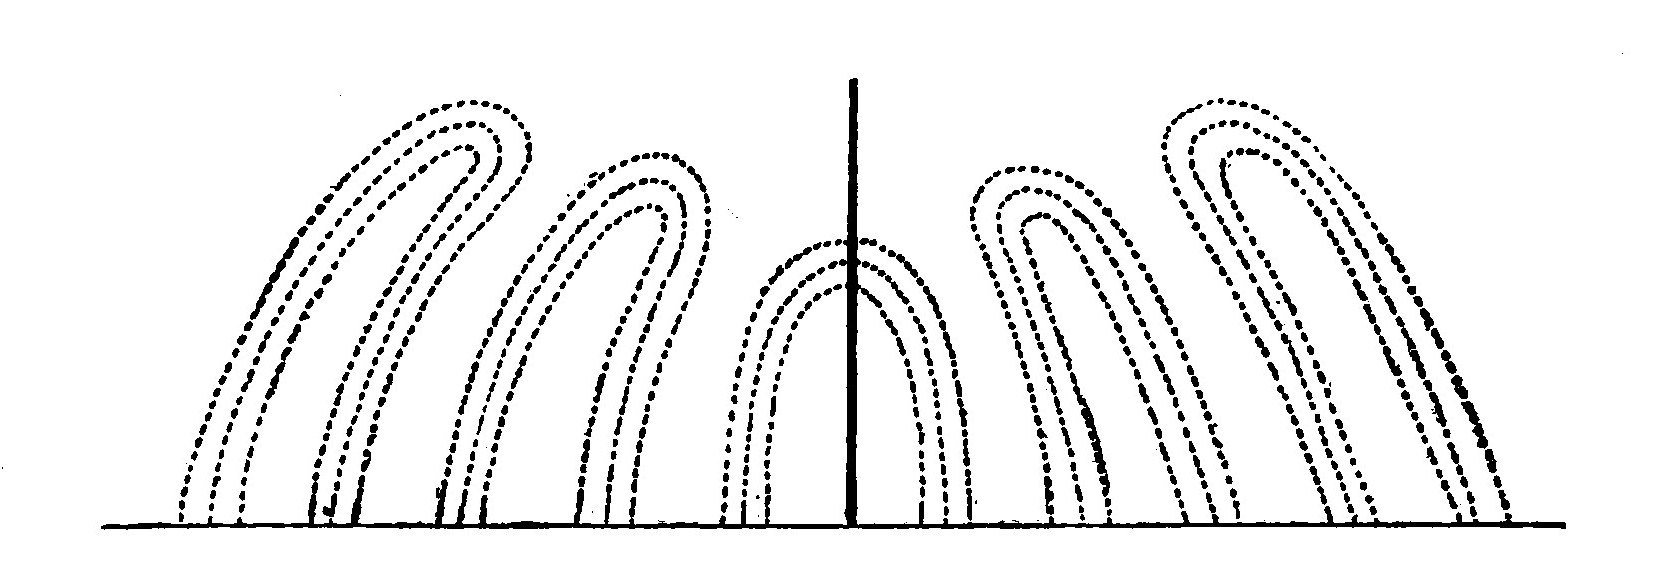 FIG. 26. Electric Waves.